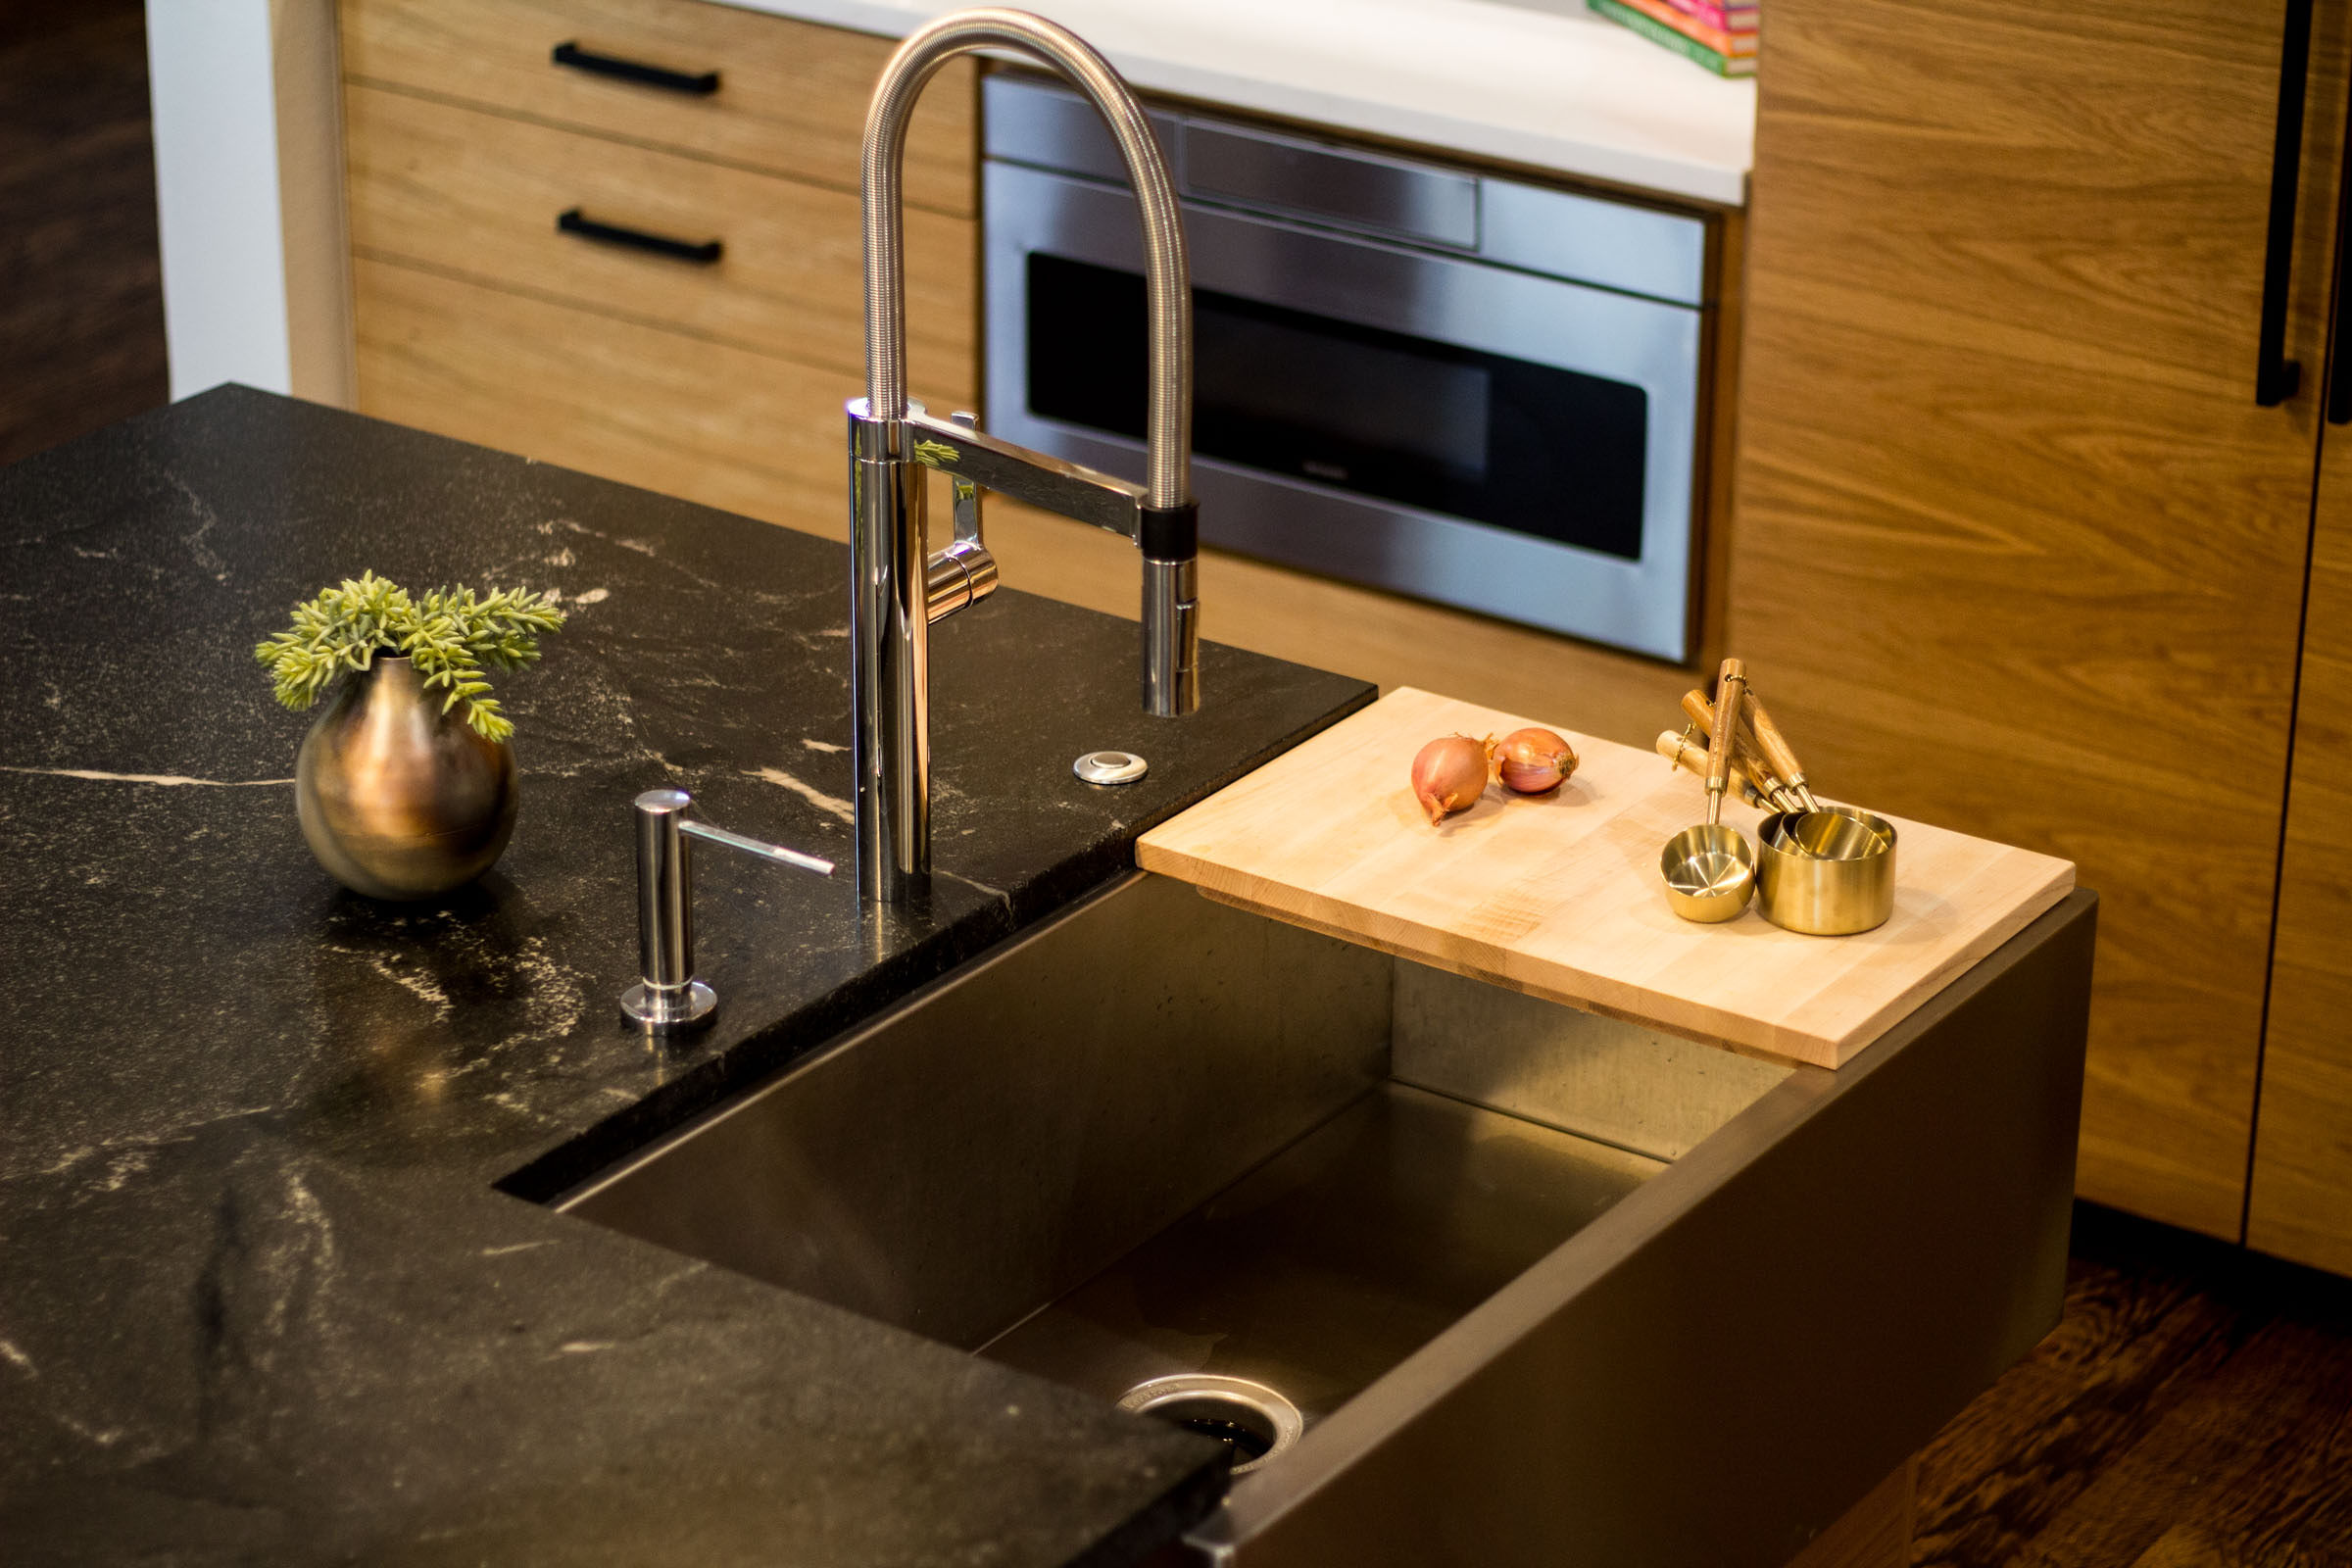 Black granite counter top, stainless steel swan kitchen faucet, cutting board onions and gold measuring cups with wooden handles.